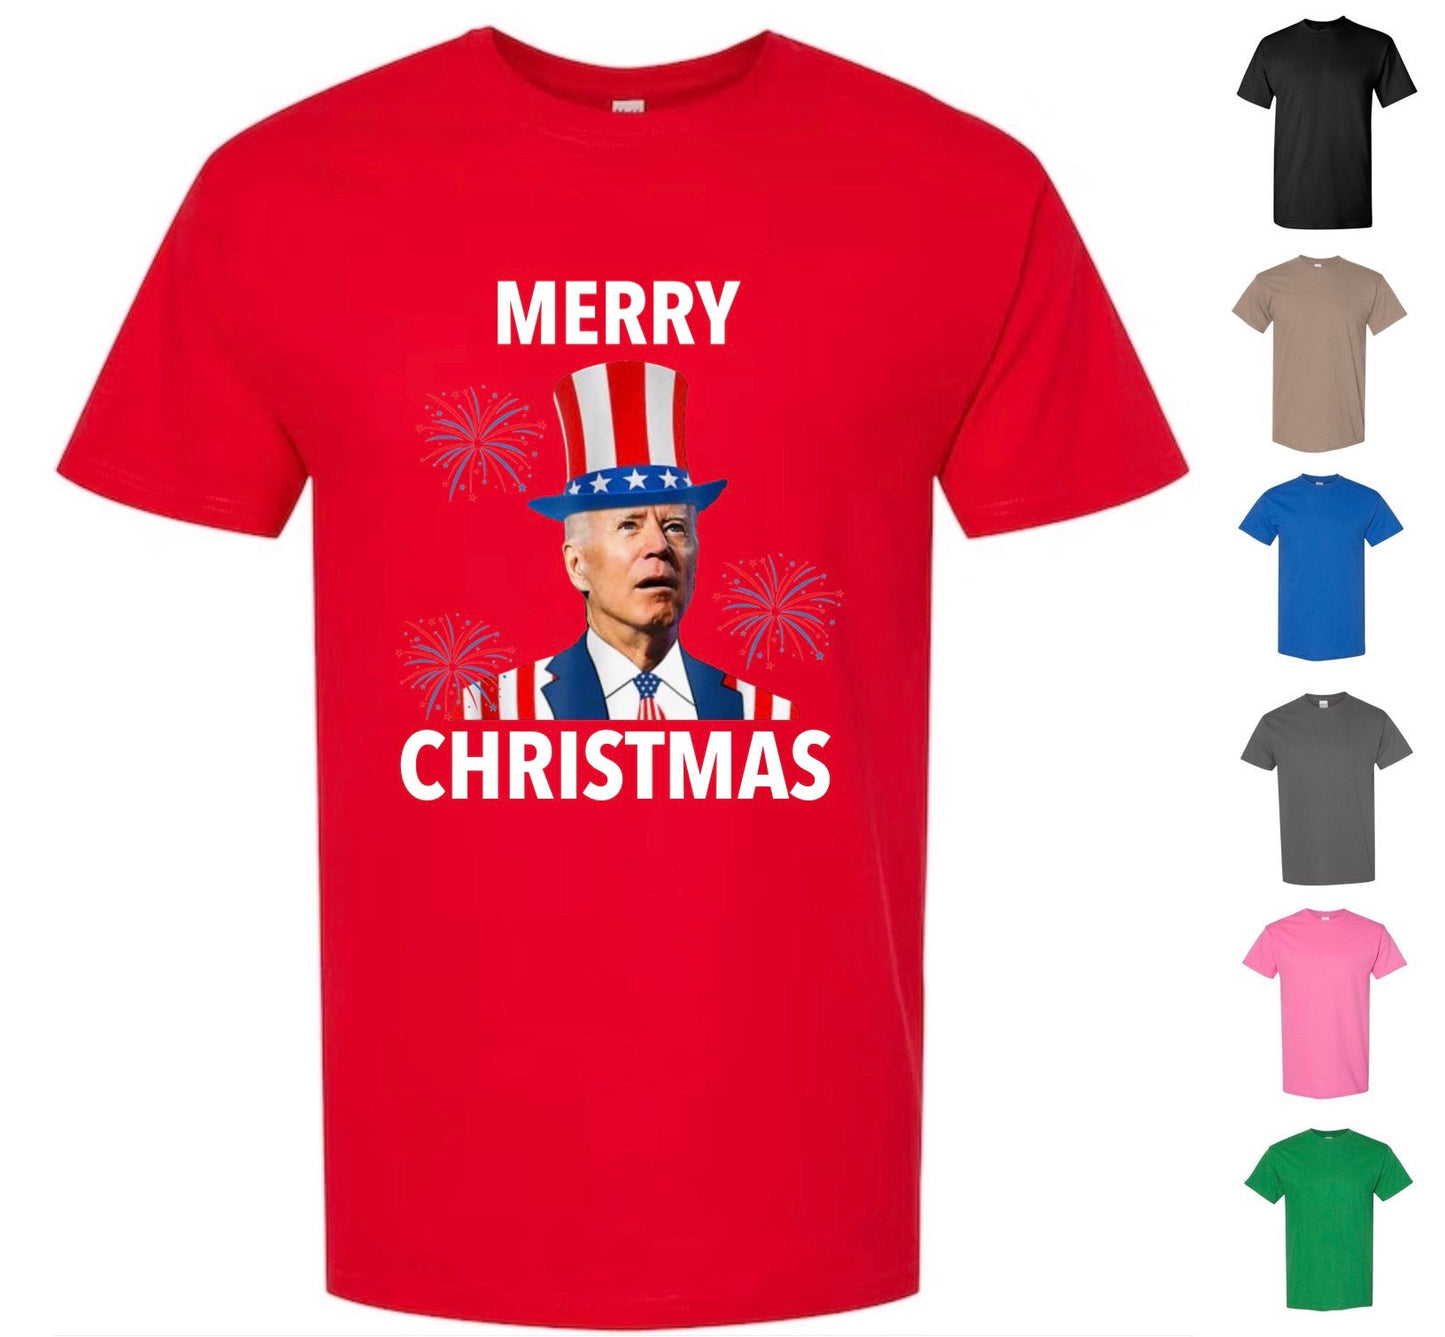 Merry Christmas — 4th of July Special (Free Shipping!)